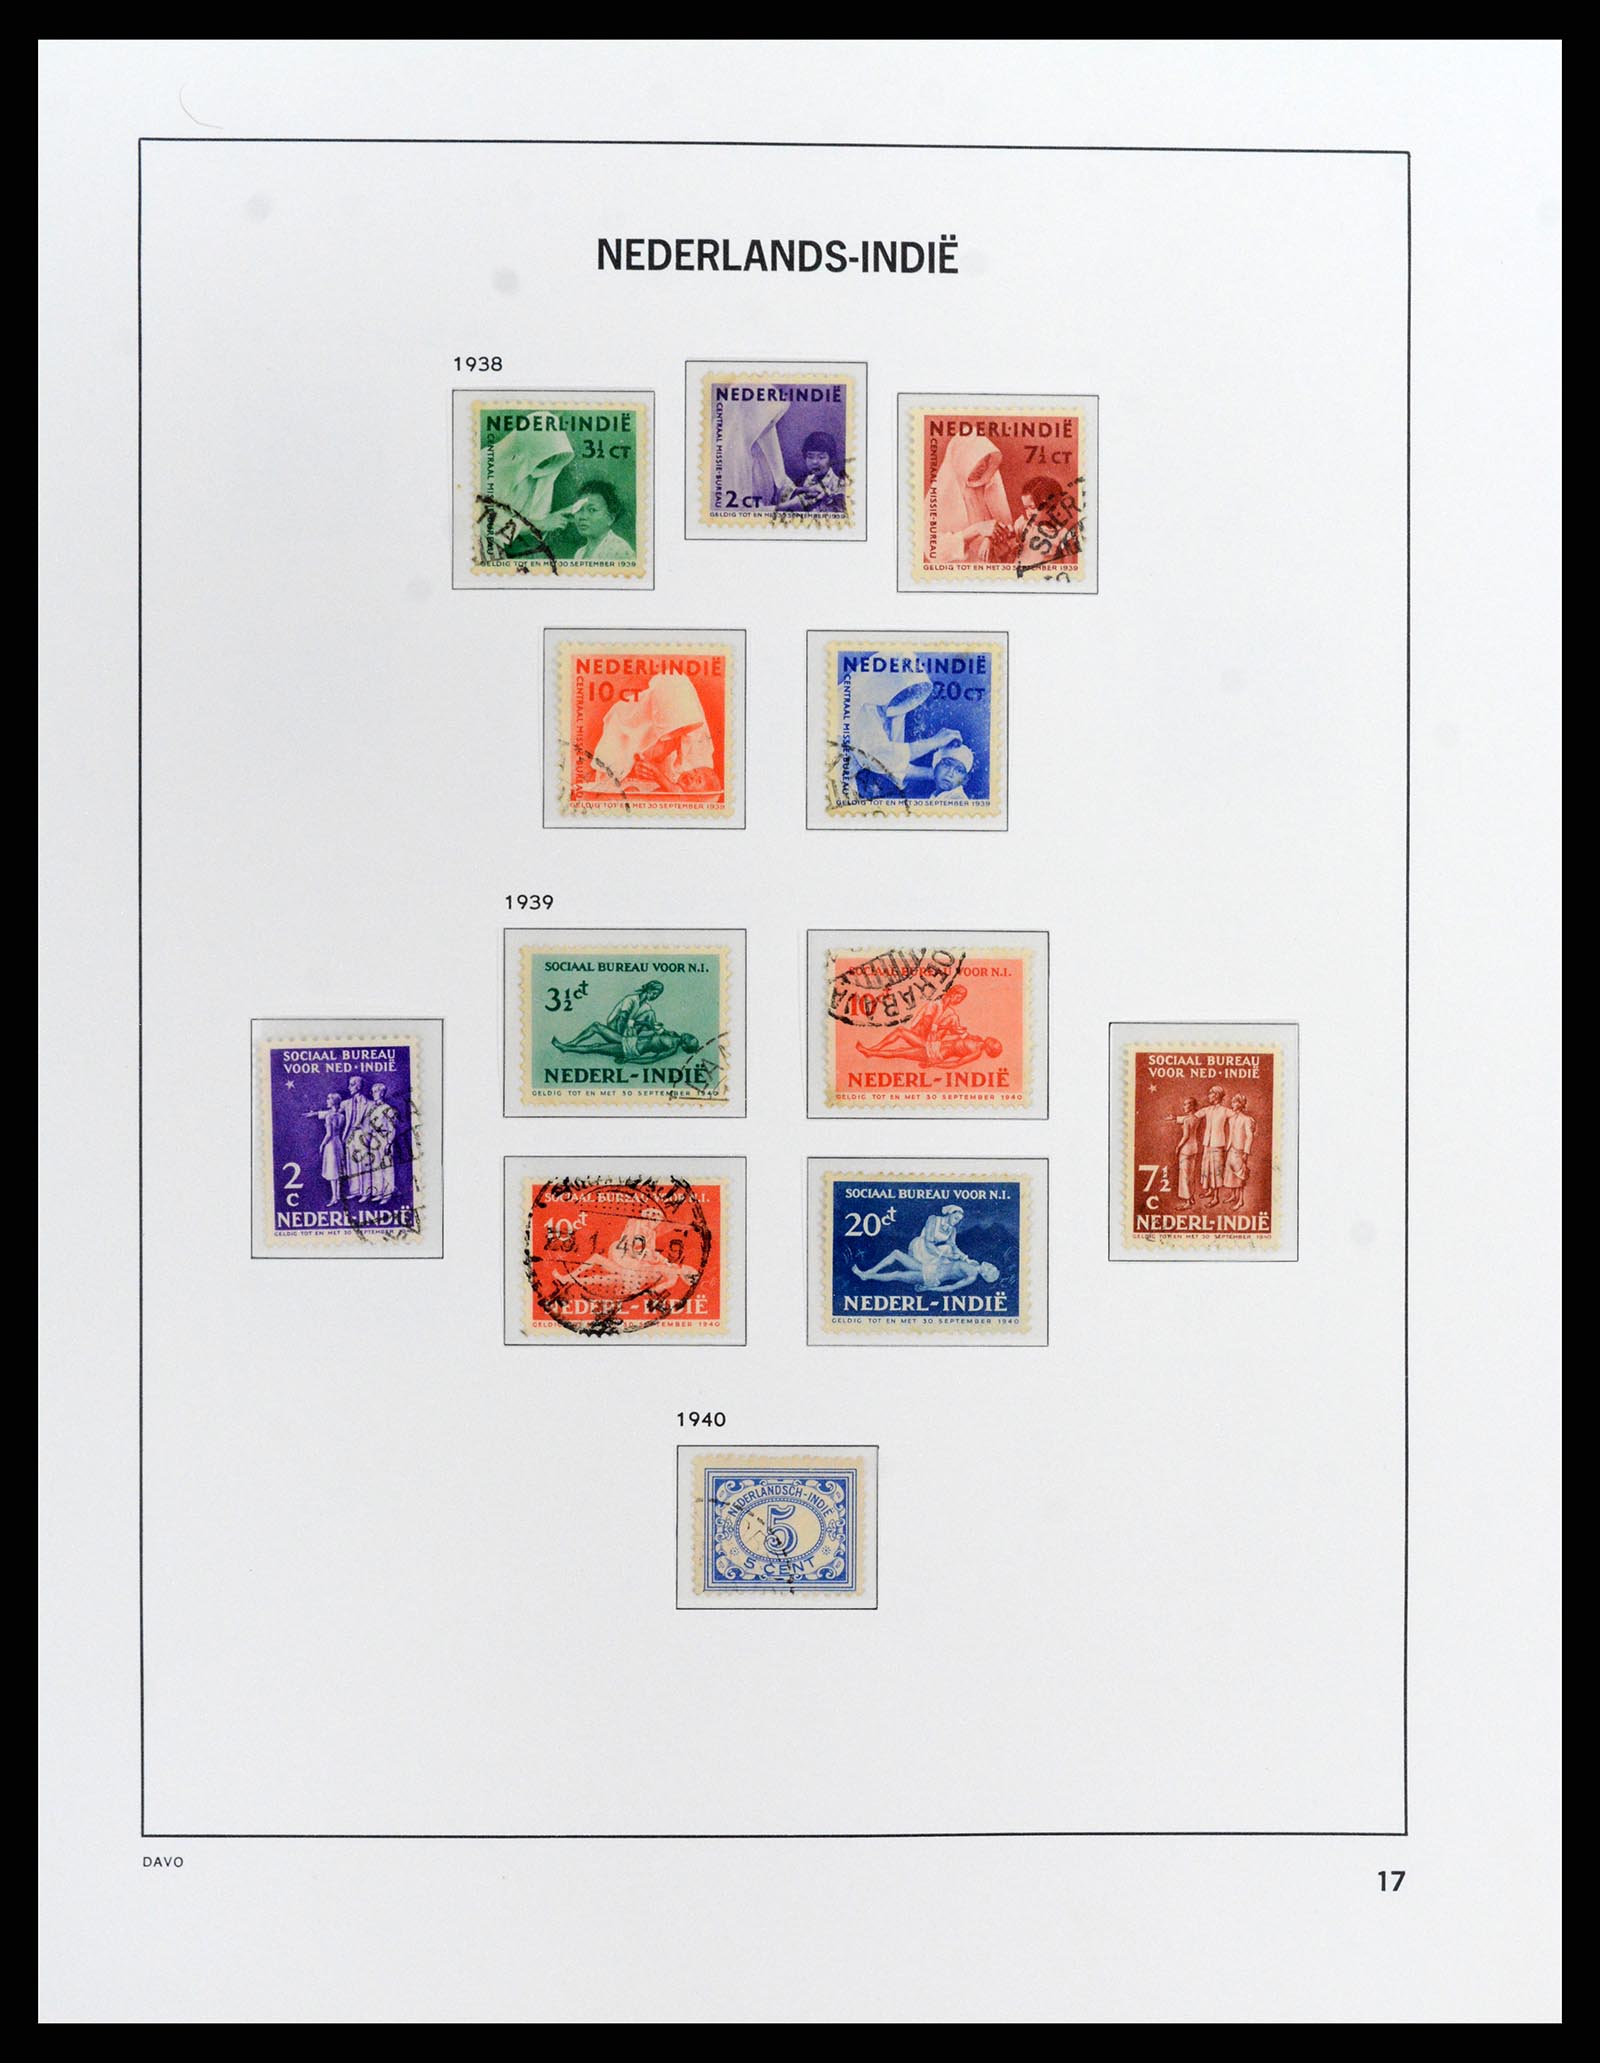 37912 017 - Stamp Collection 37912 Dutch east Indies 1870-1948.